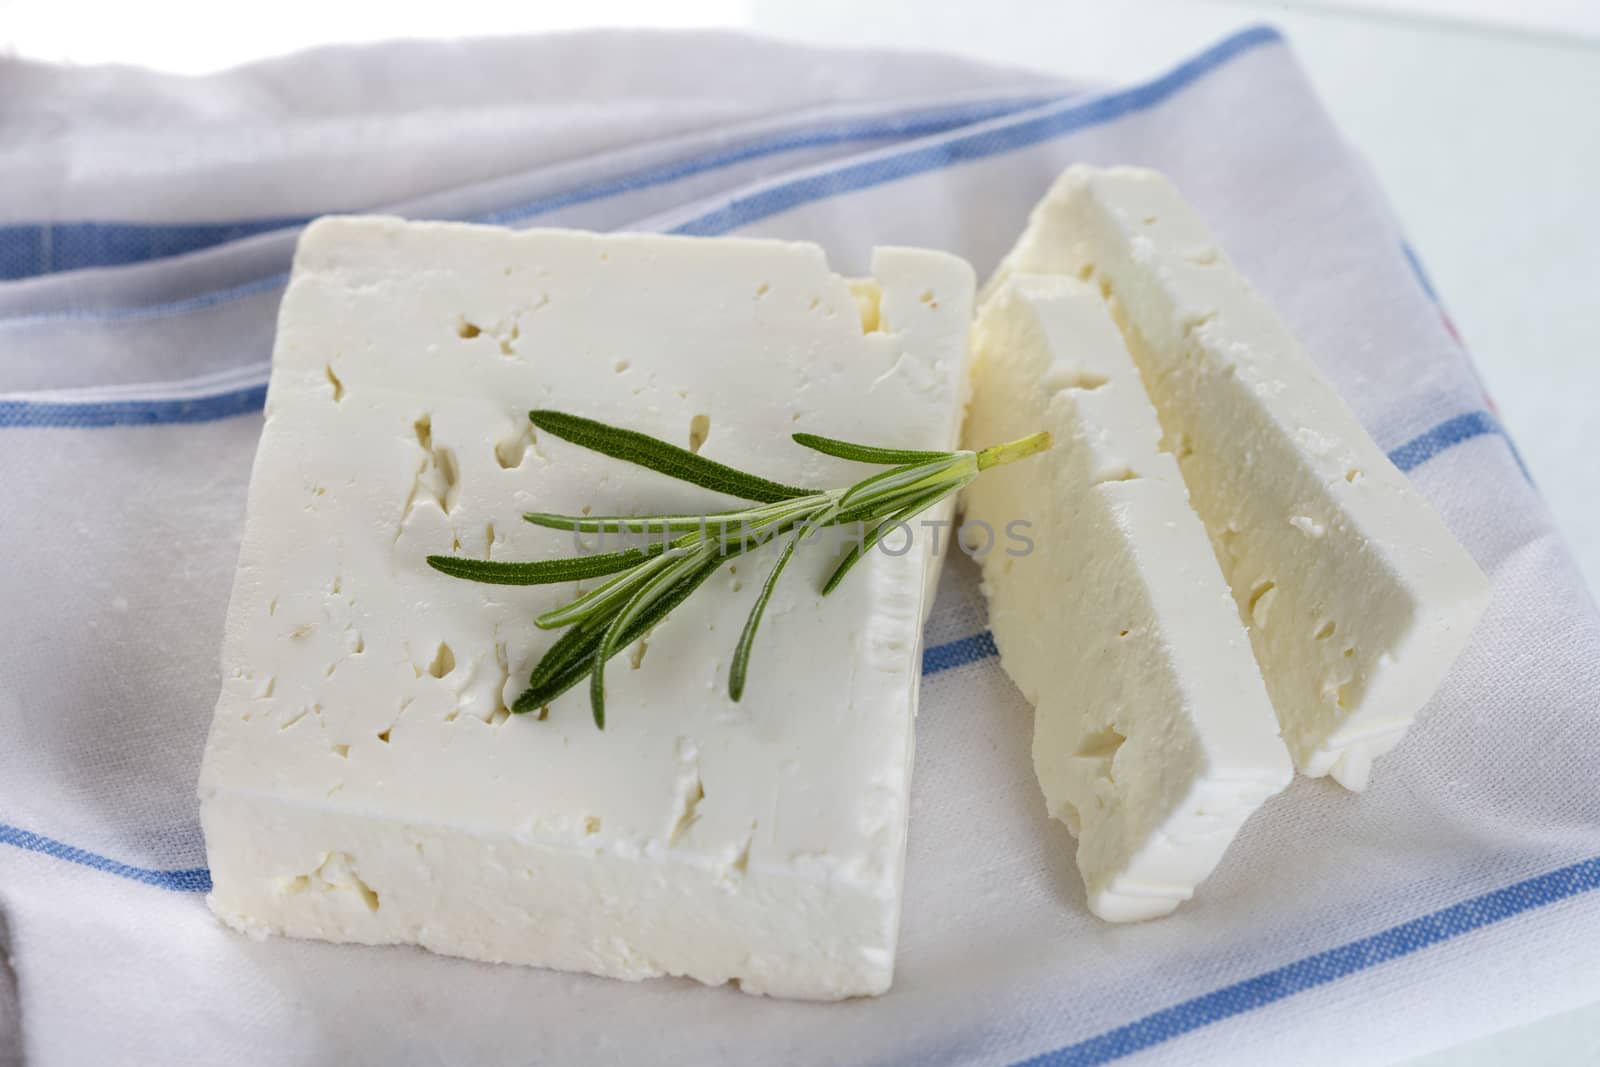 Traditional Greek feta cheese with rosemary